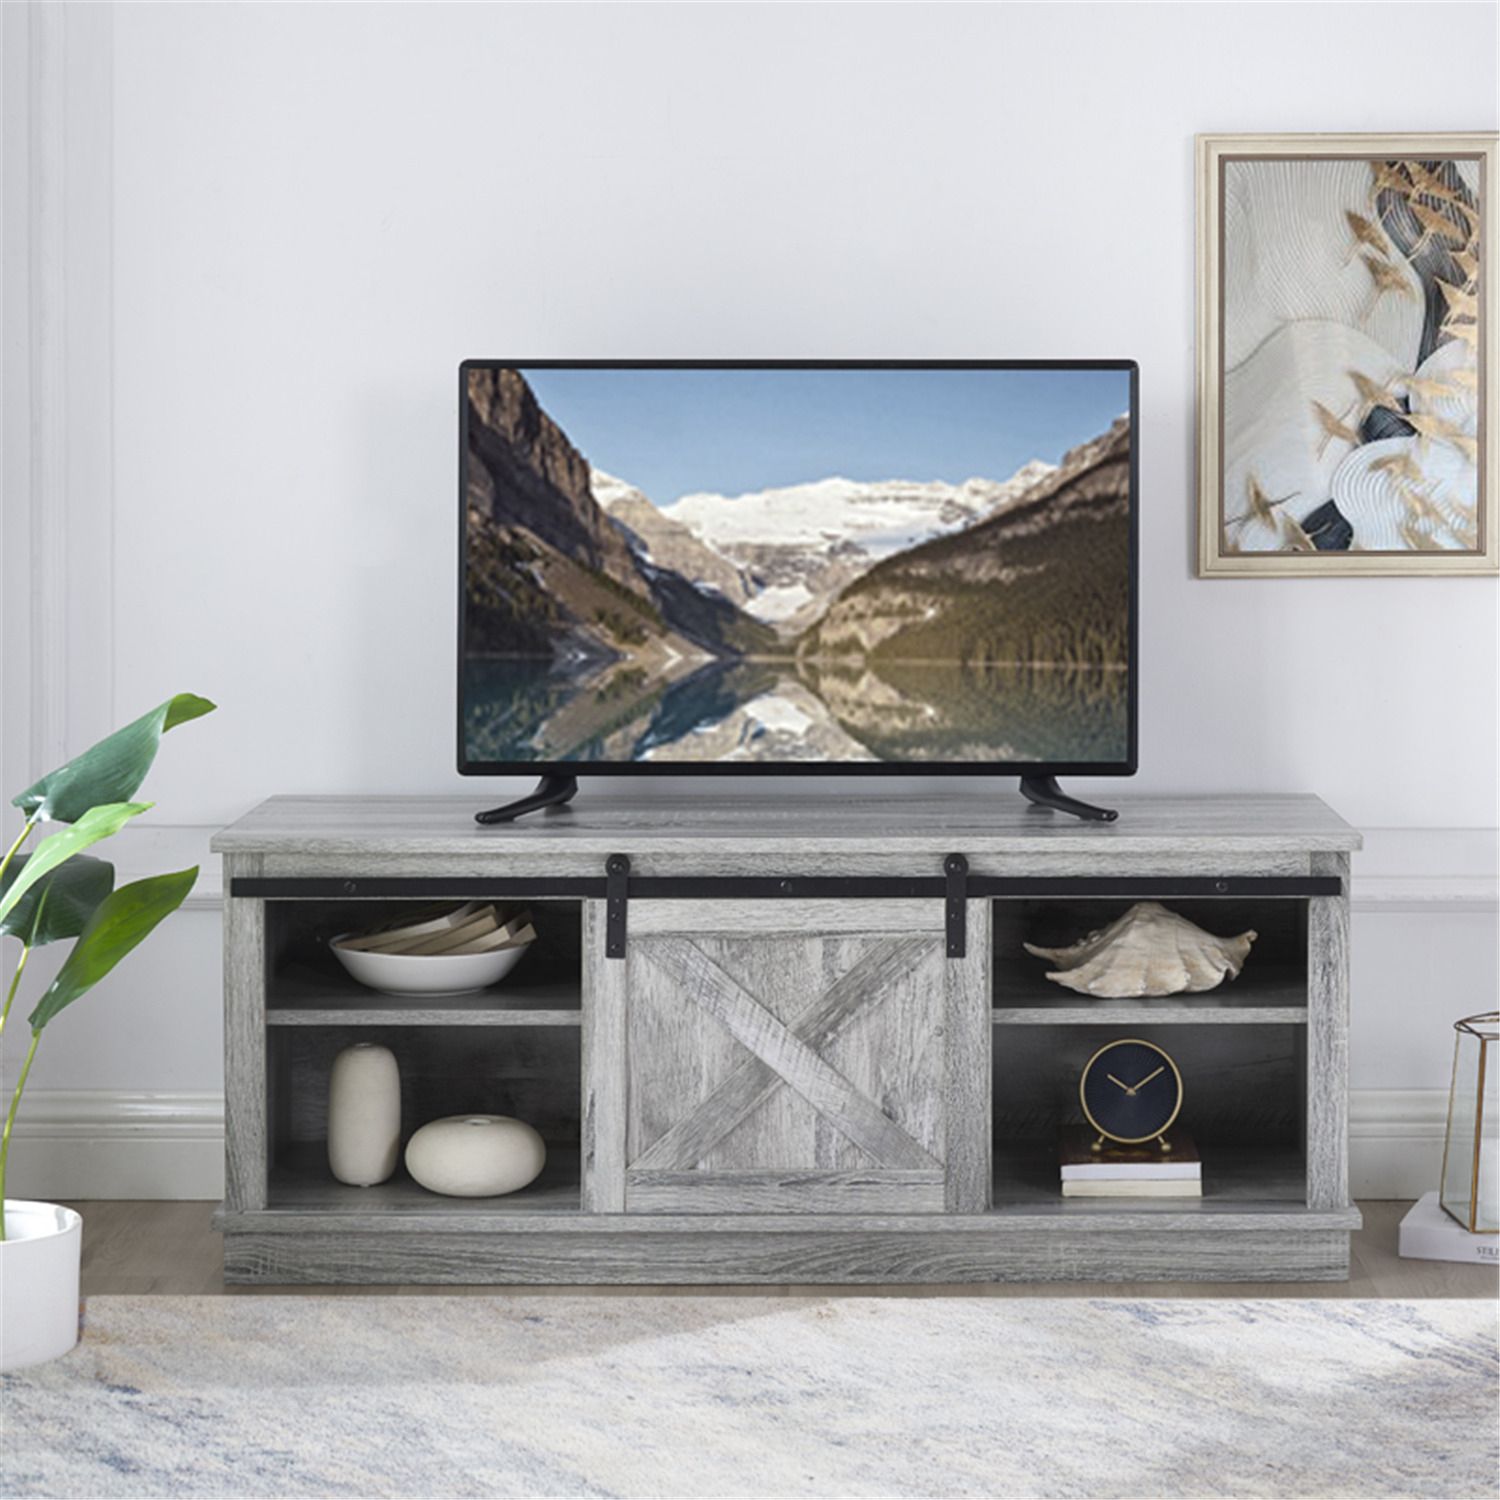 Naomi Home Shelby Sliding Barn Door Tv Stand For 50" Tv With Storage Shelf  – Naomi Home Regarding Farmhouse Stands With Shelves (View 11 of 15)